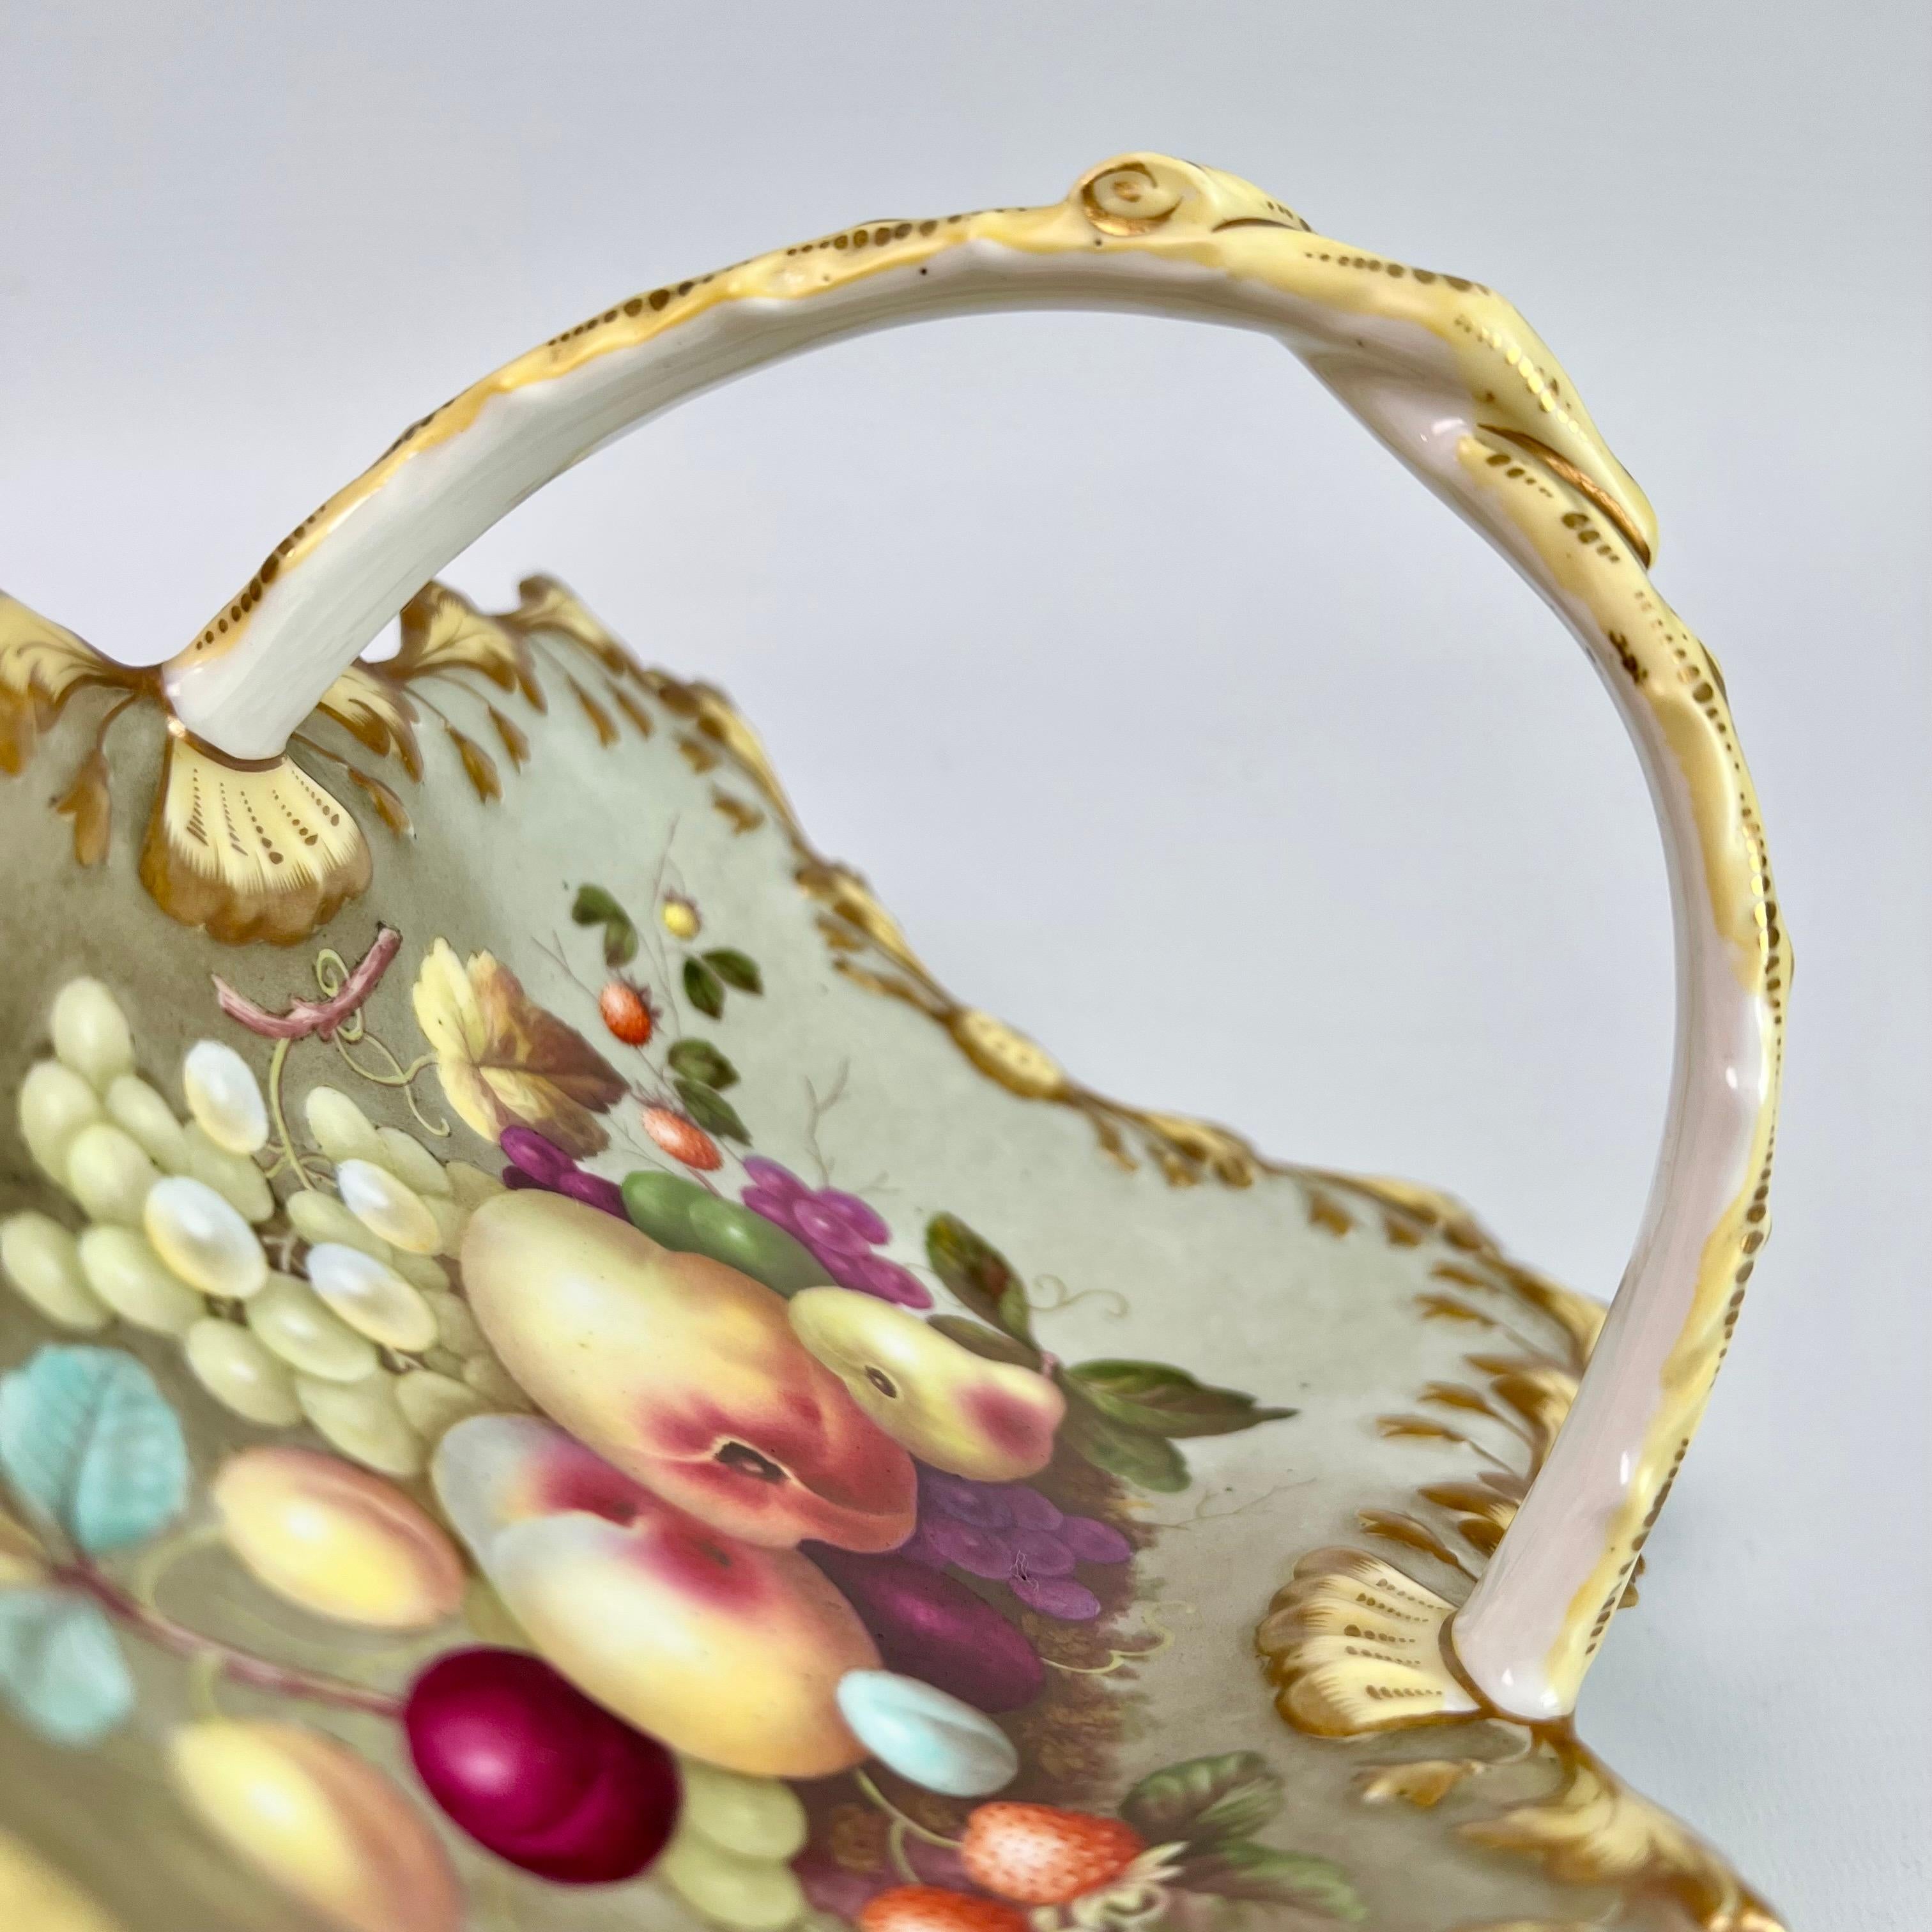 Chamberlains Worcester Porcelain Basket, Fruits by Thomas Steele, 1830-1832 2